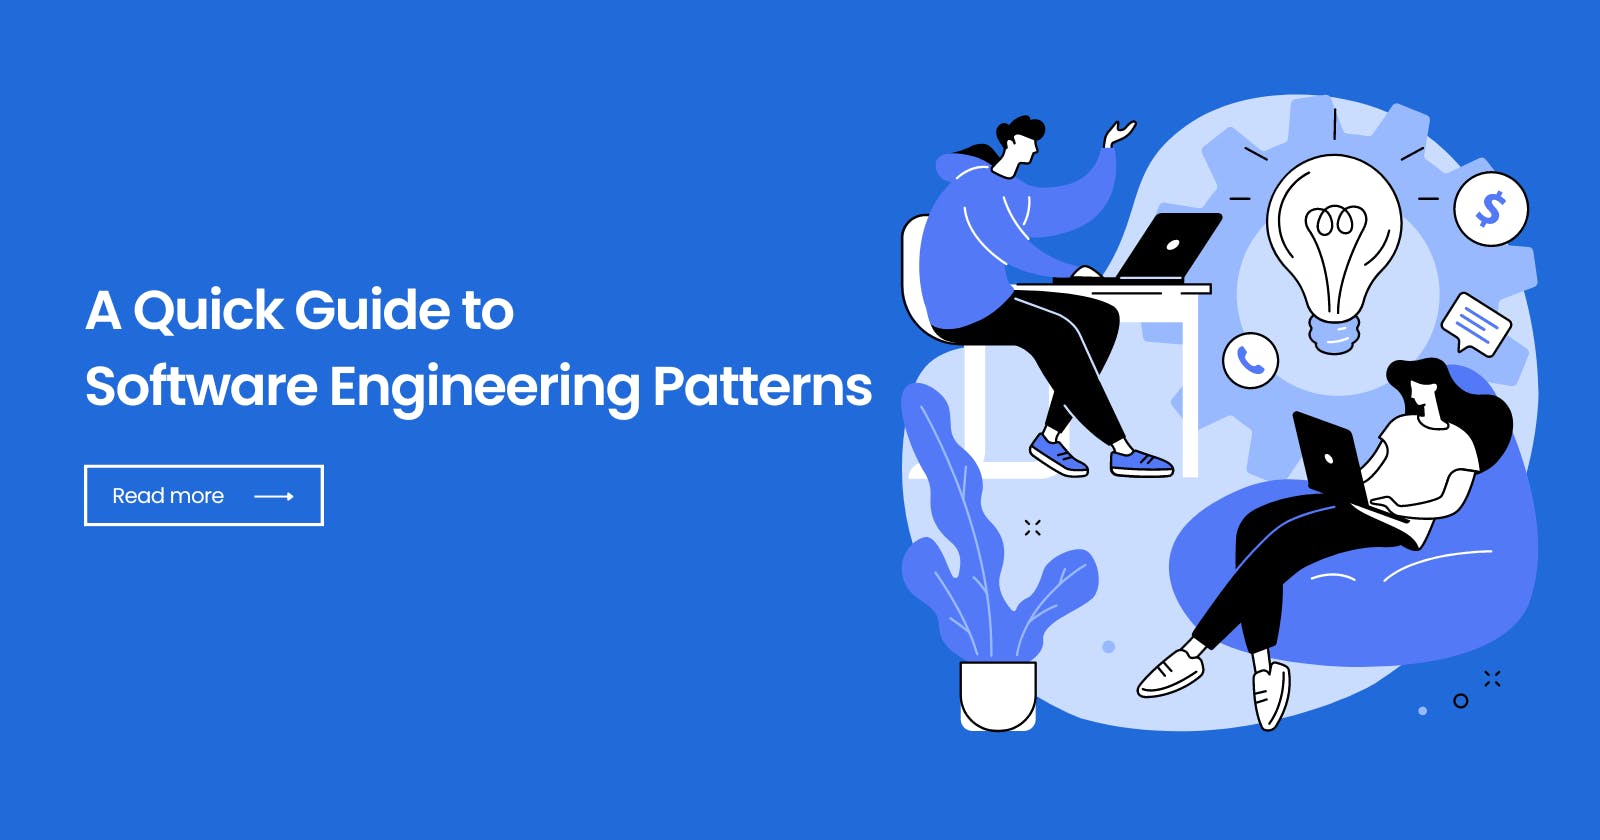 A Quick Guide to Software Engineering Patterns